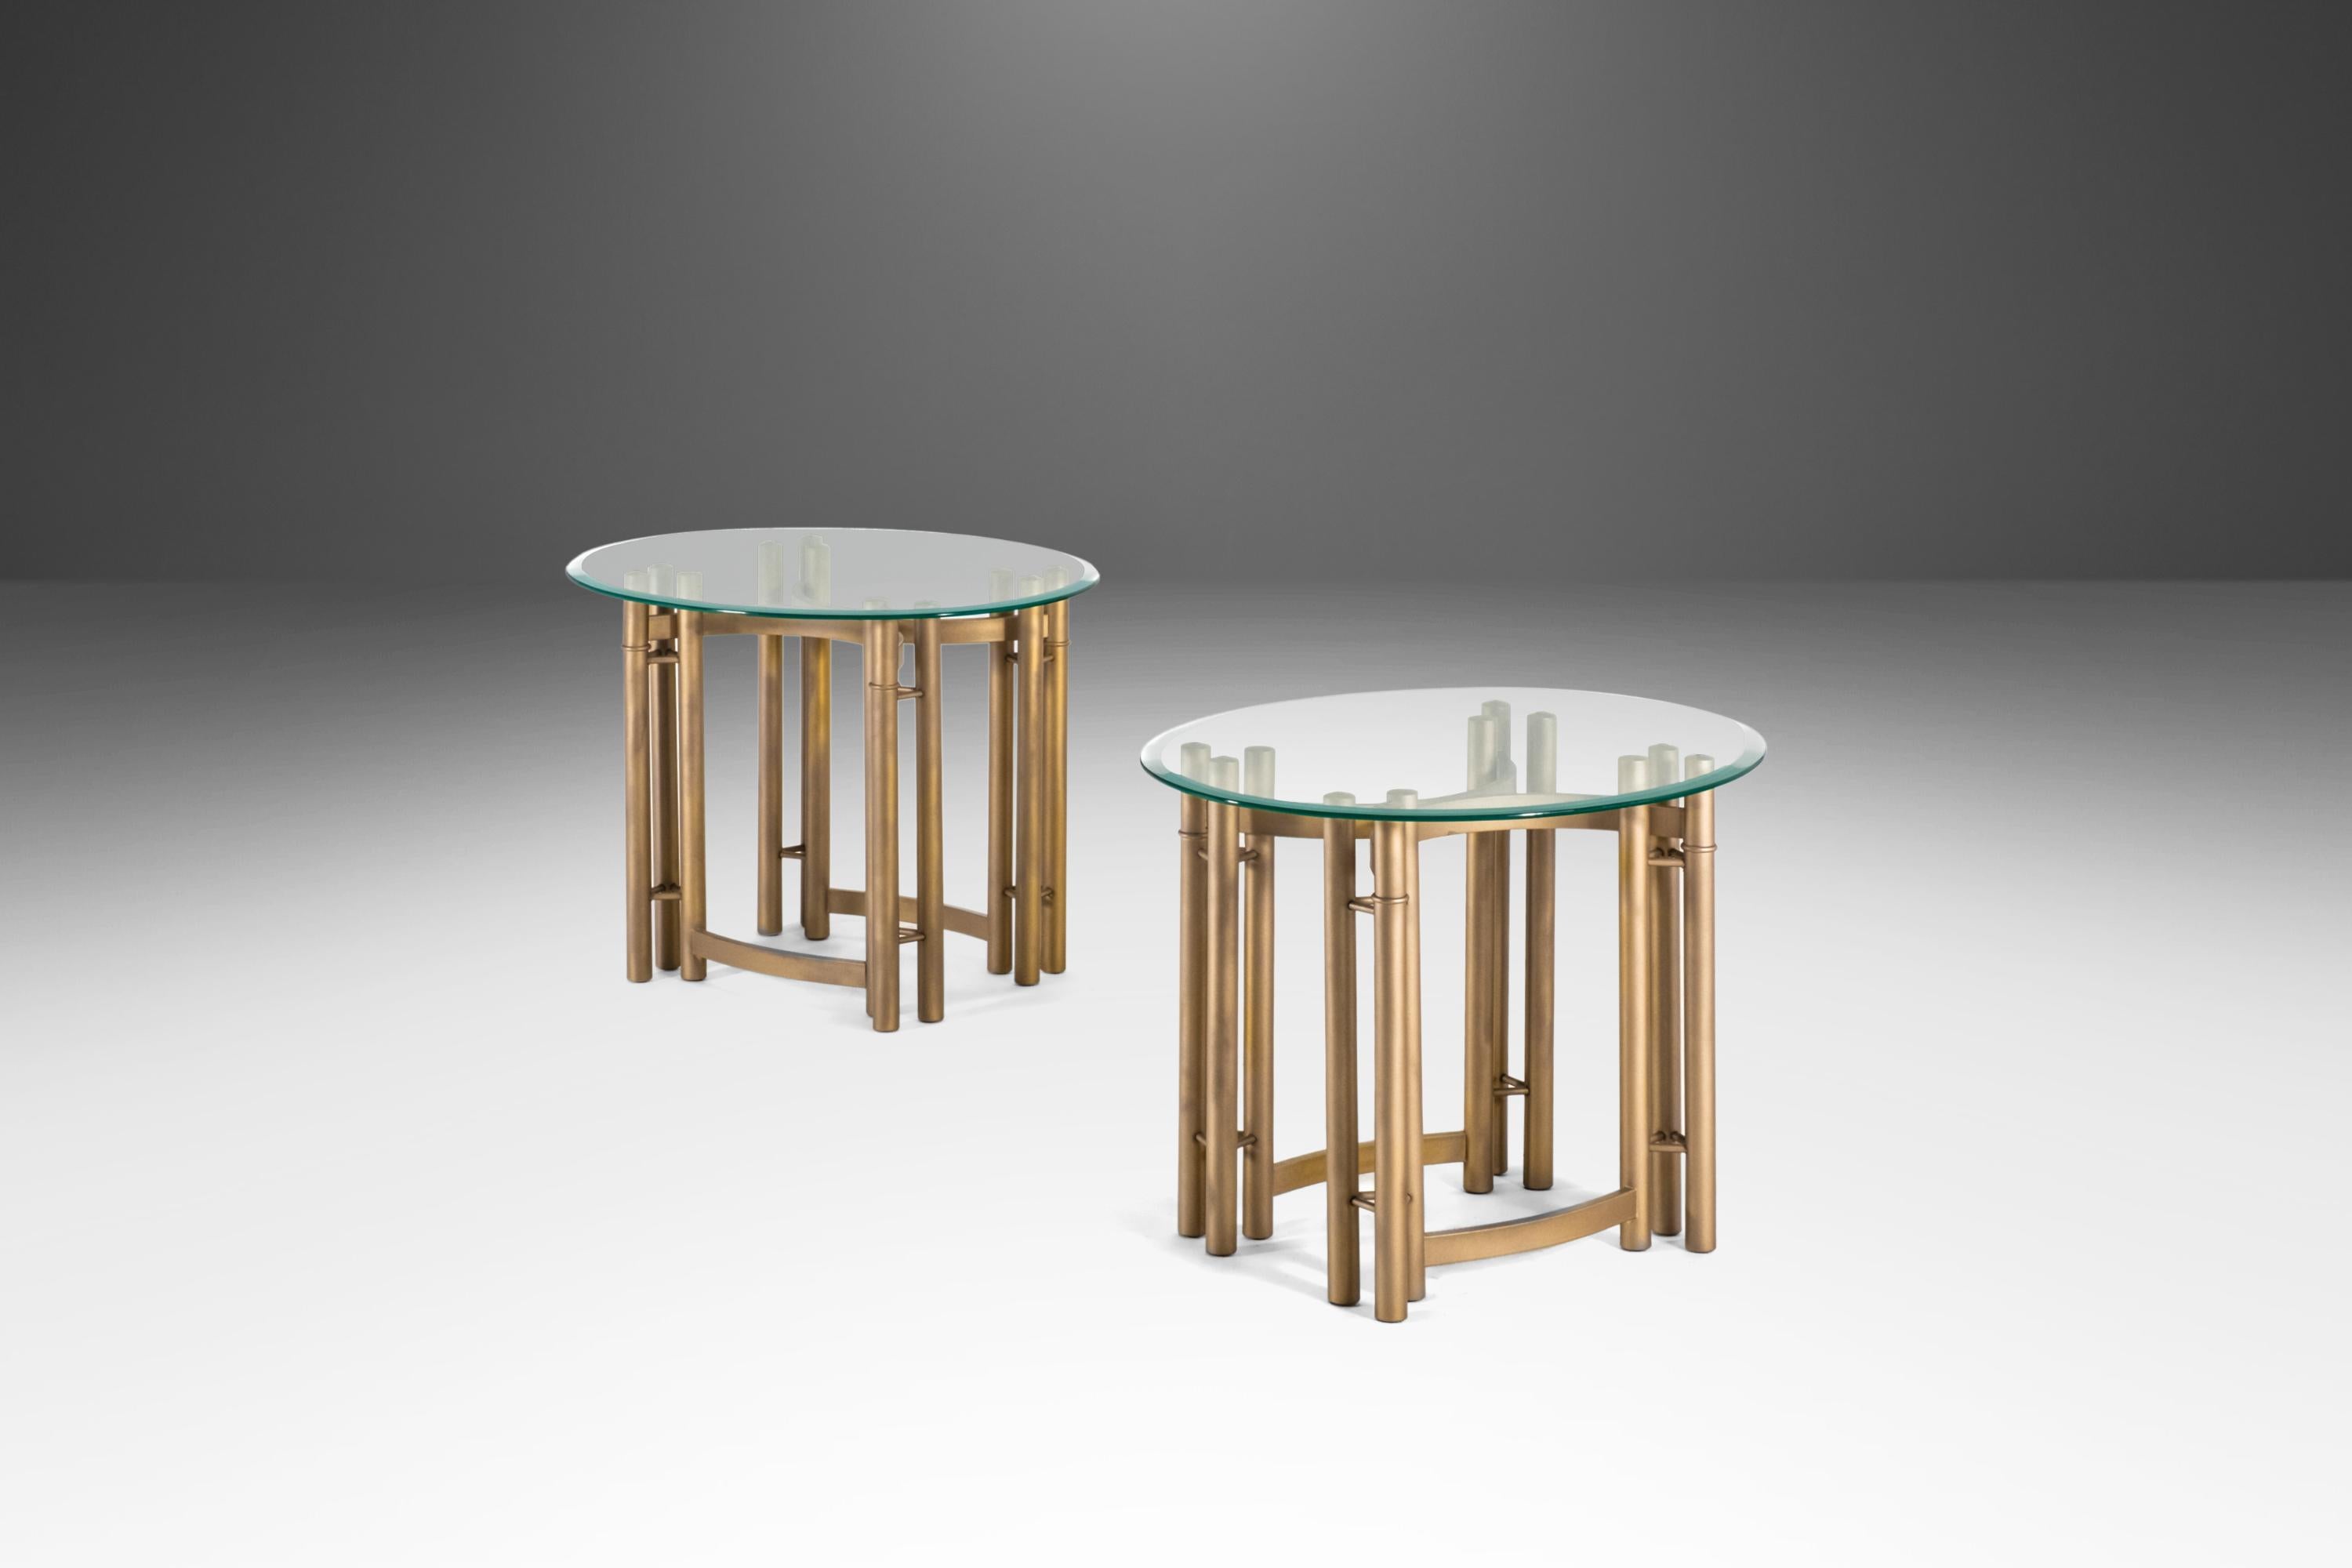 Equal parts style and luxury this fabulous set of end tables is the epitome of 'Hollywood Regency'. Freshly powder coated in an opulent gold flake this set of tables is perfect for collectors looking to add a bit of lavish flavor to their space.